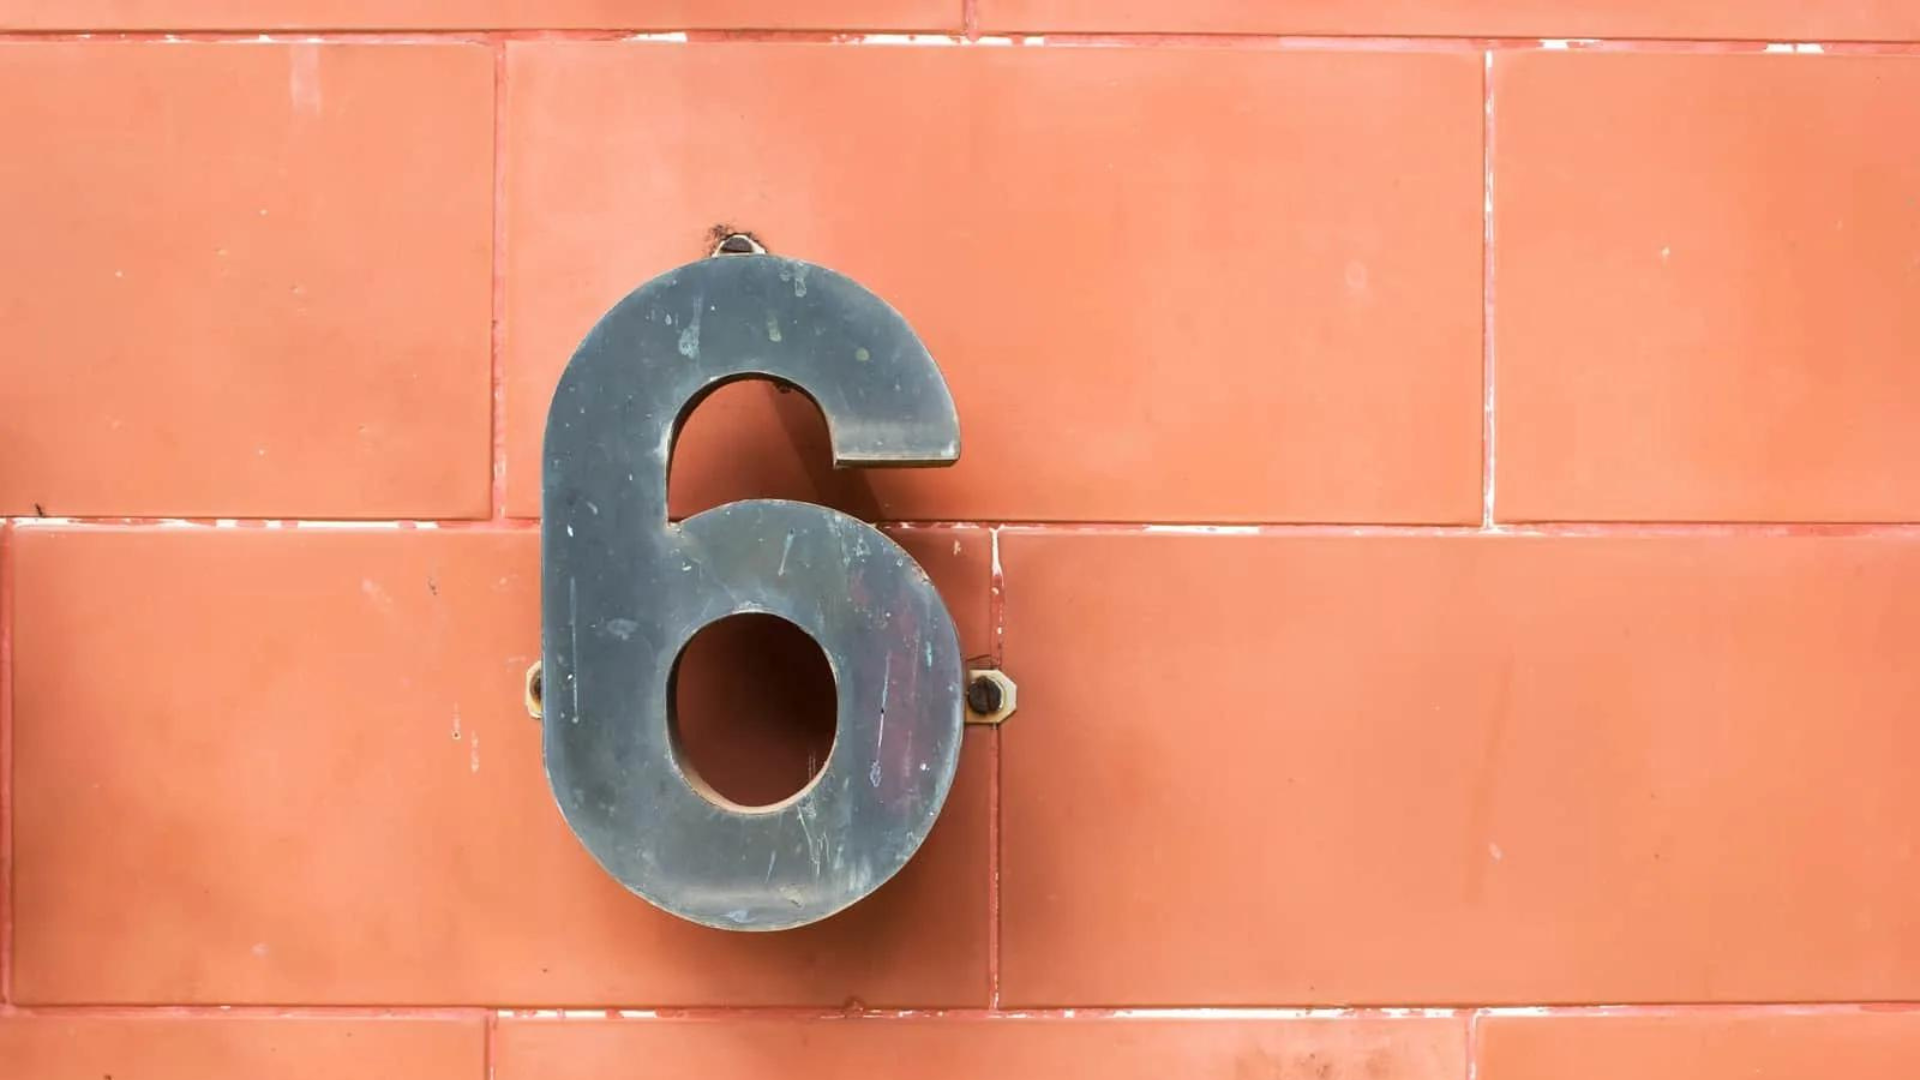 An orange wall with Number 6 made of metal